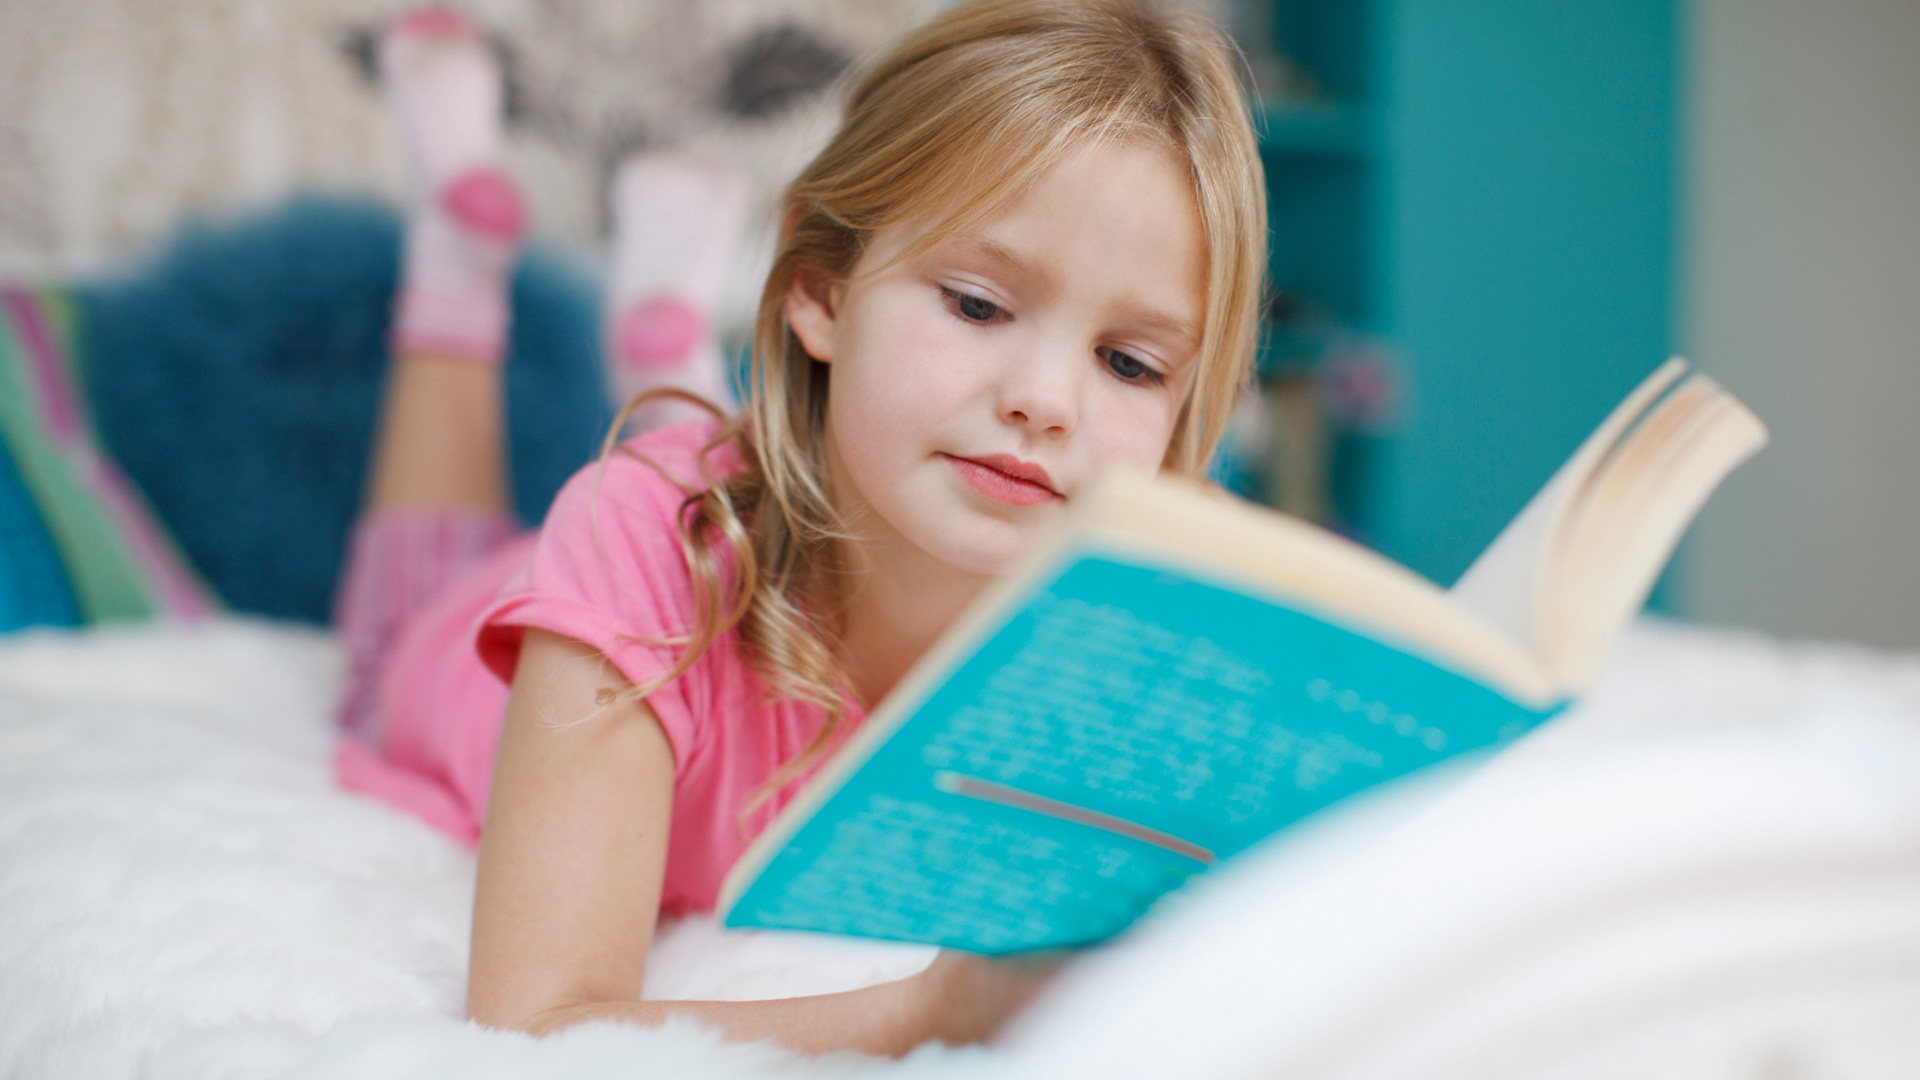 Young Caucasian girl in a pink shirt lying down and reading a book